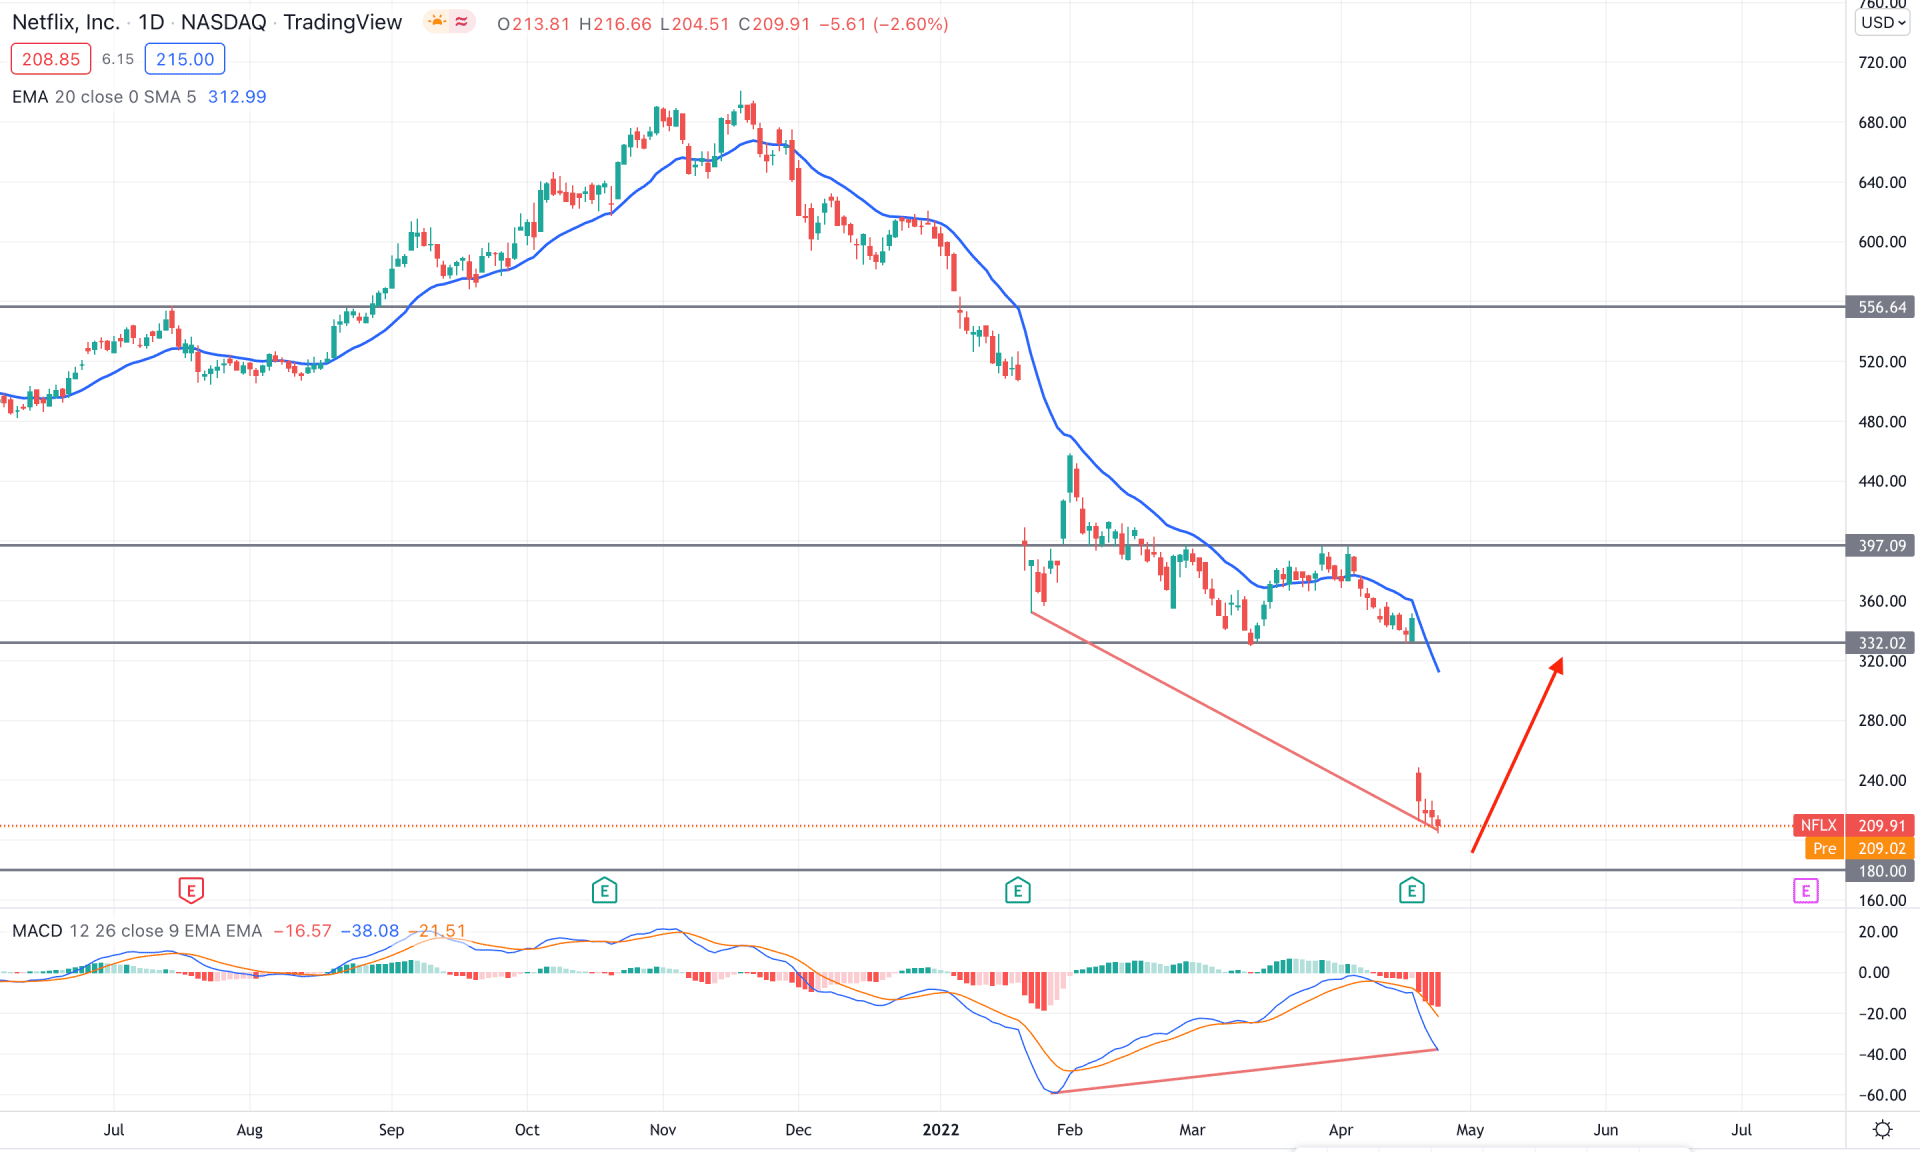 Netflix Stock (NFLX) Daily Technical Analysis 26th April 2022